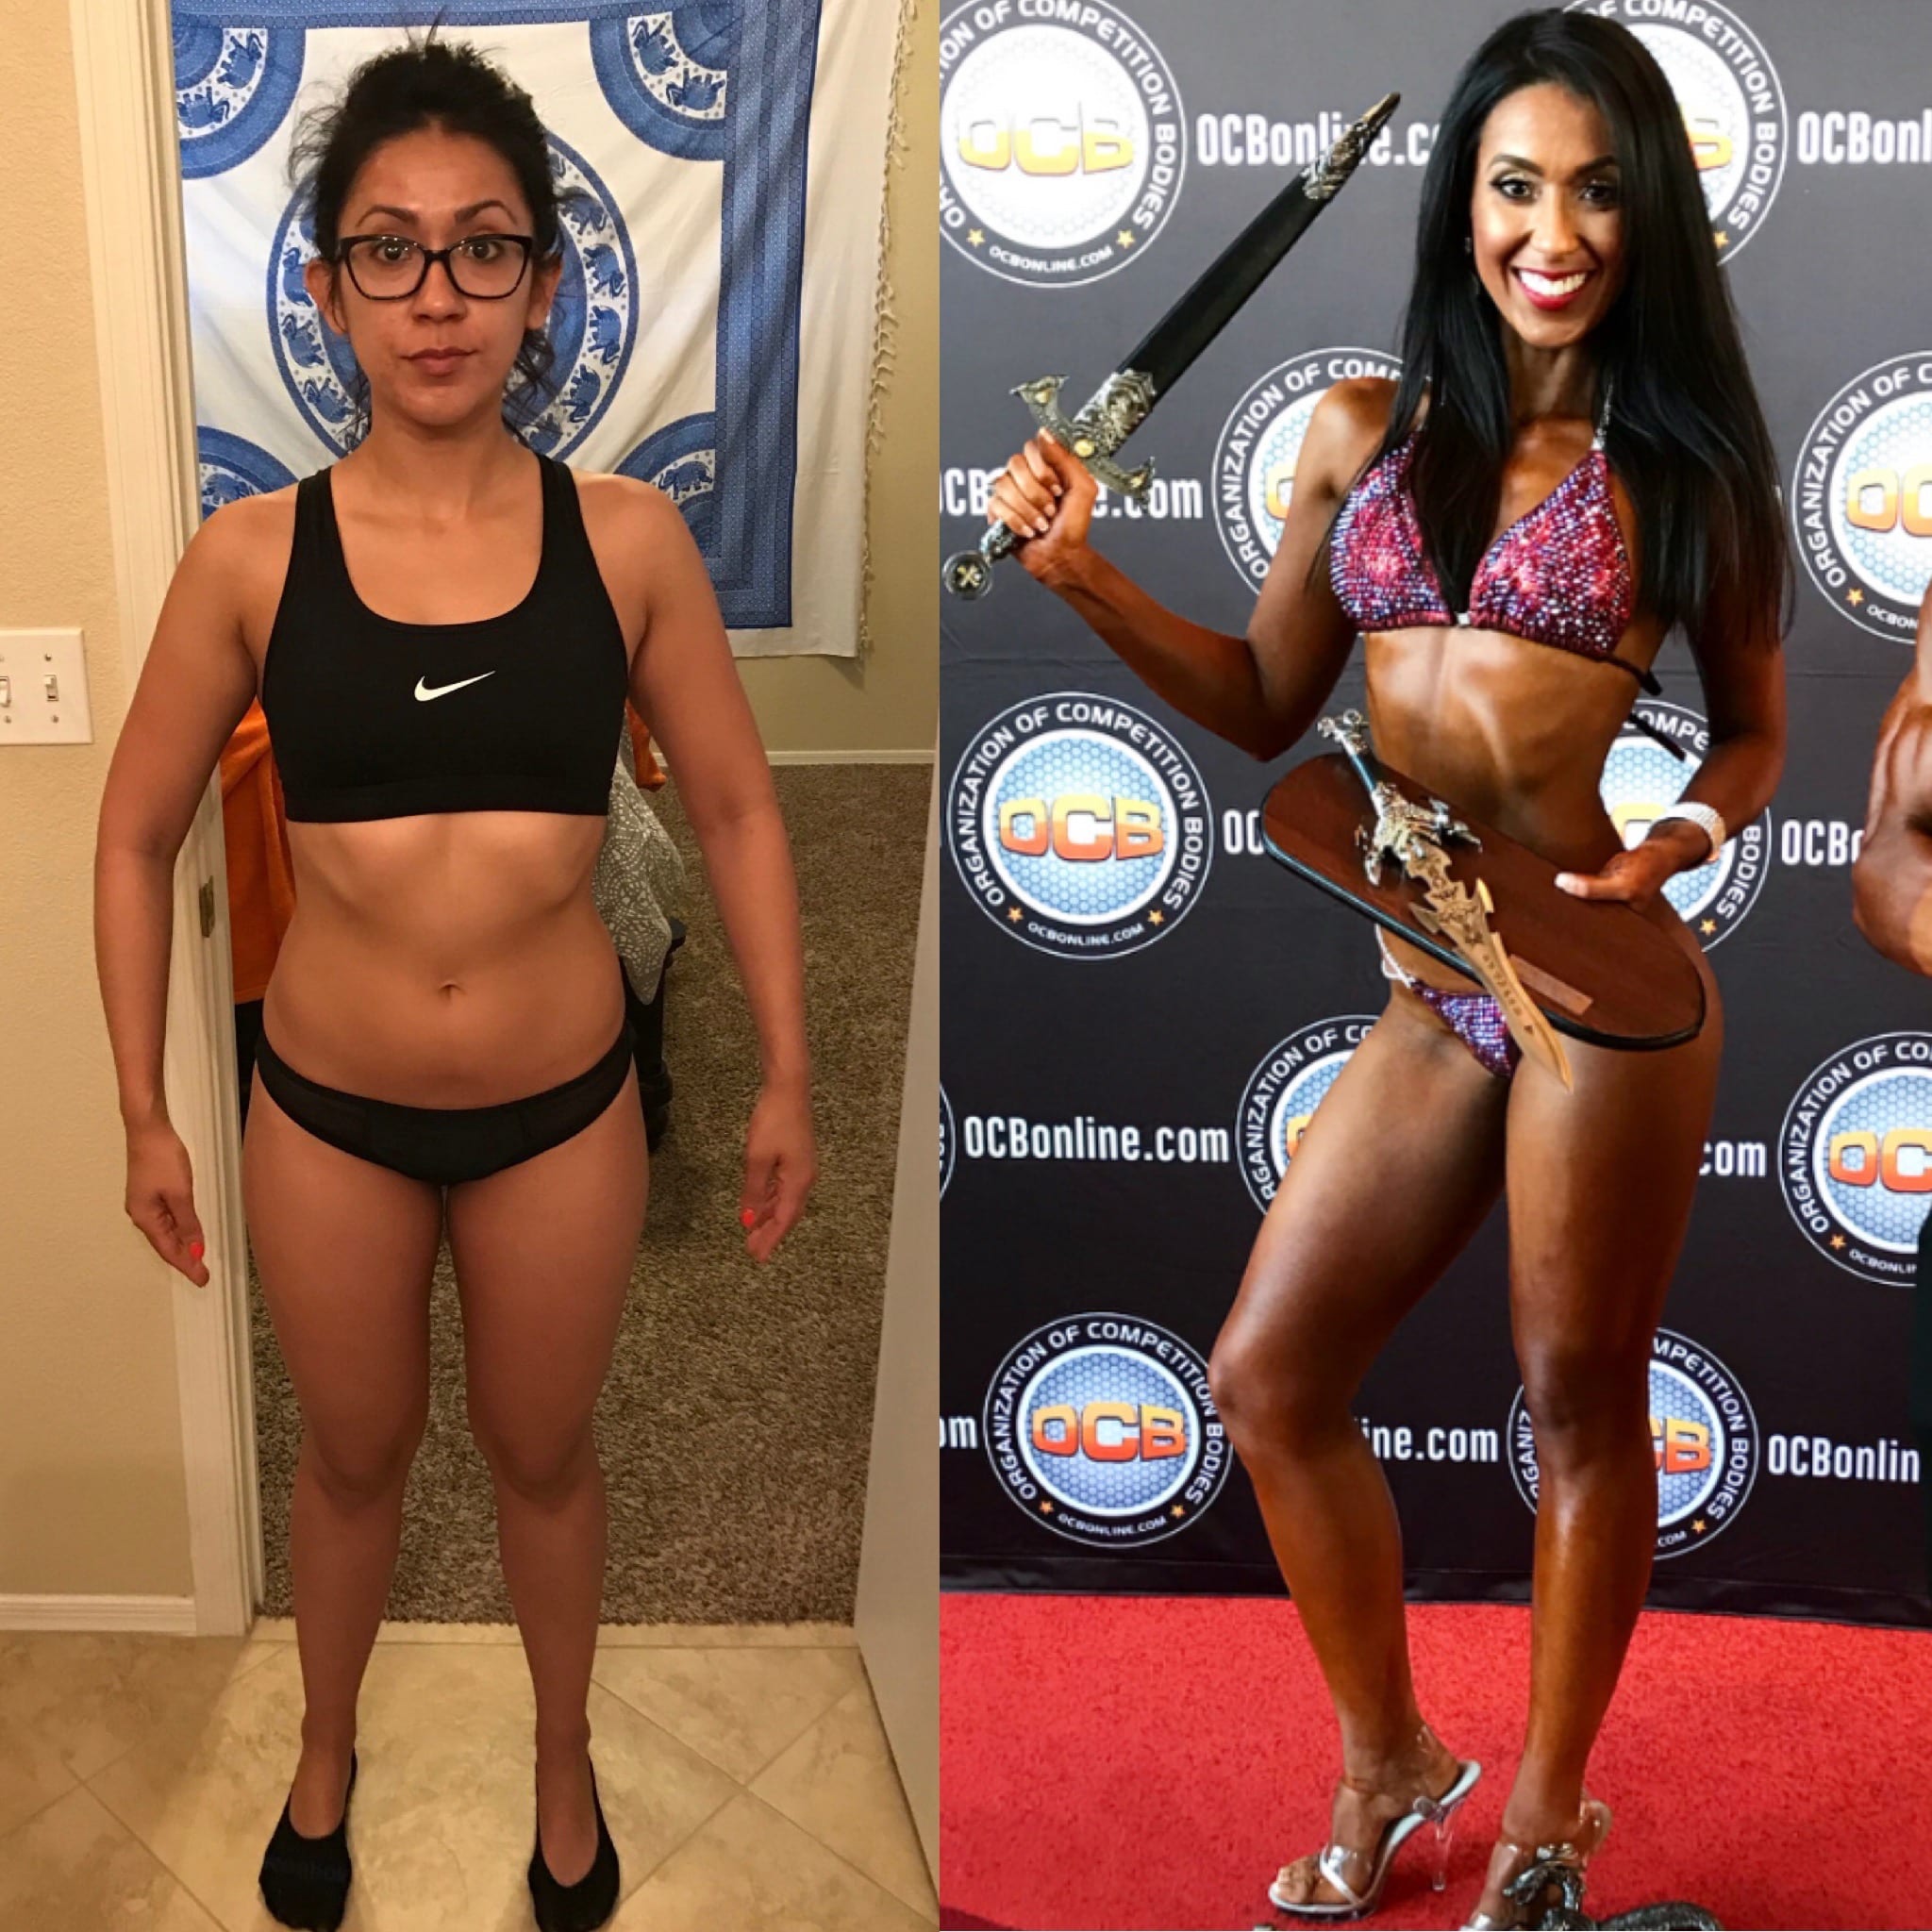 personal training and nutrition progress and contest